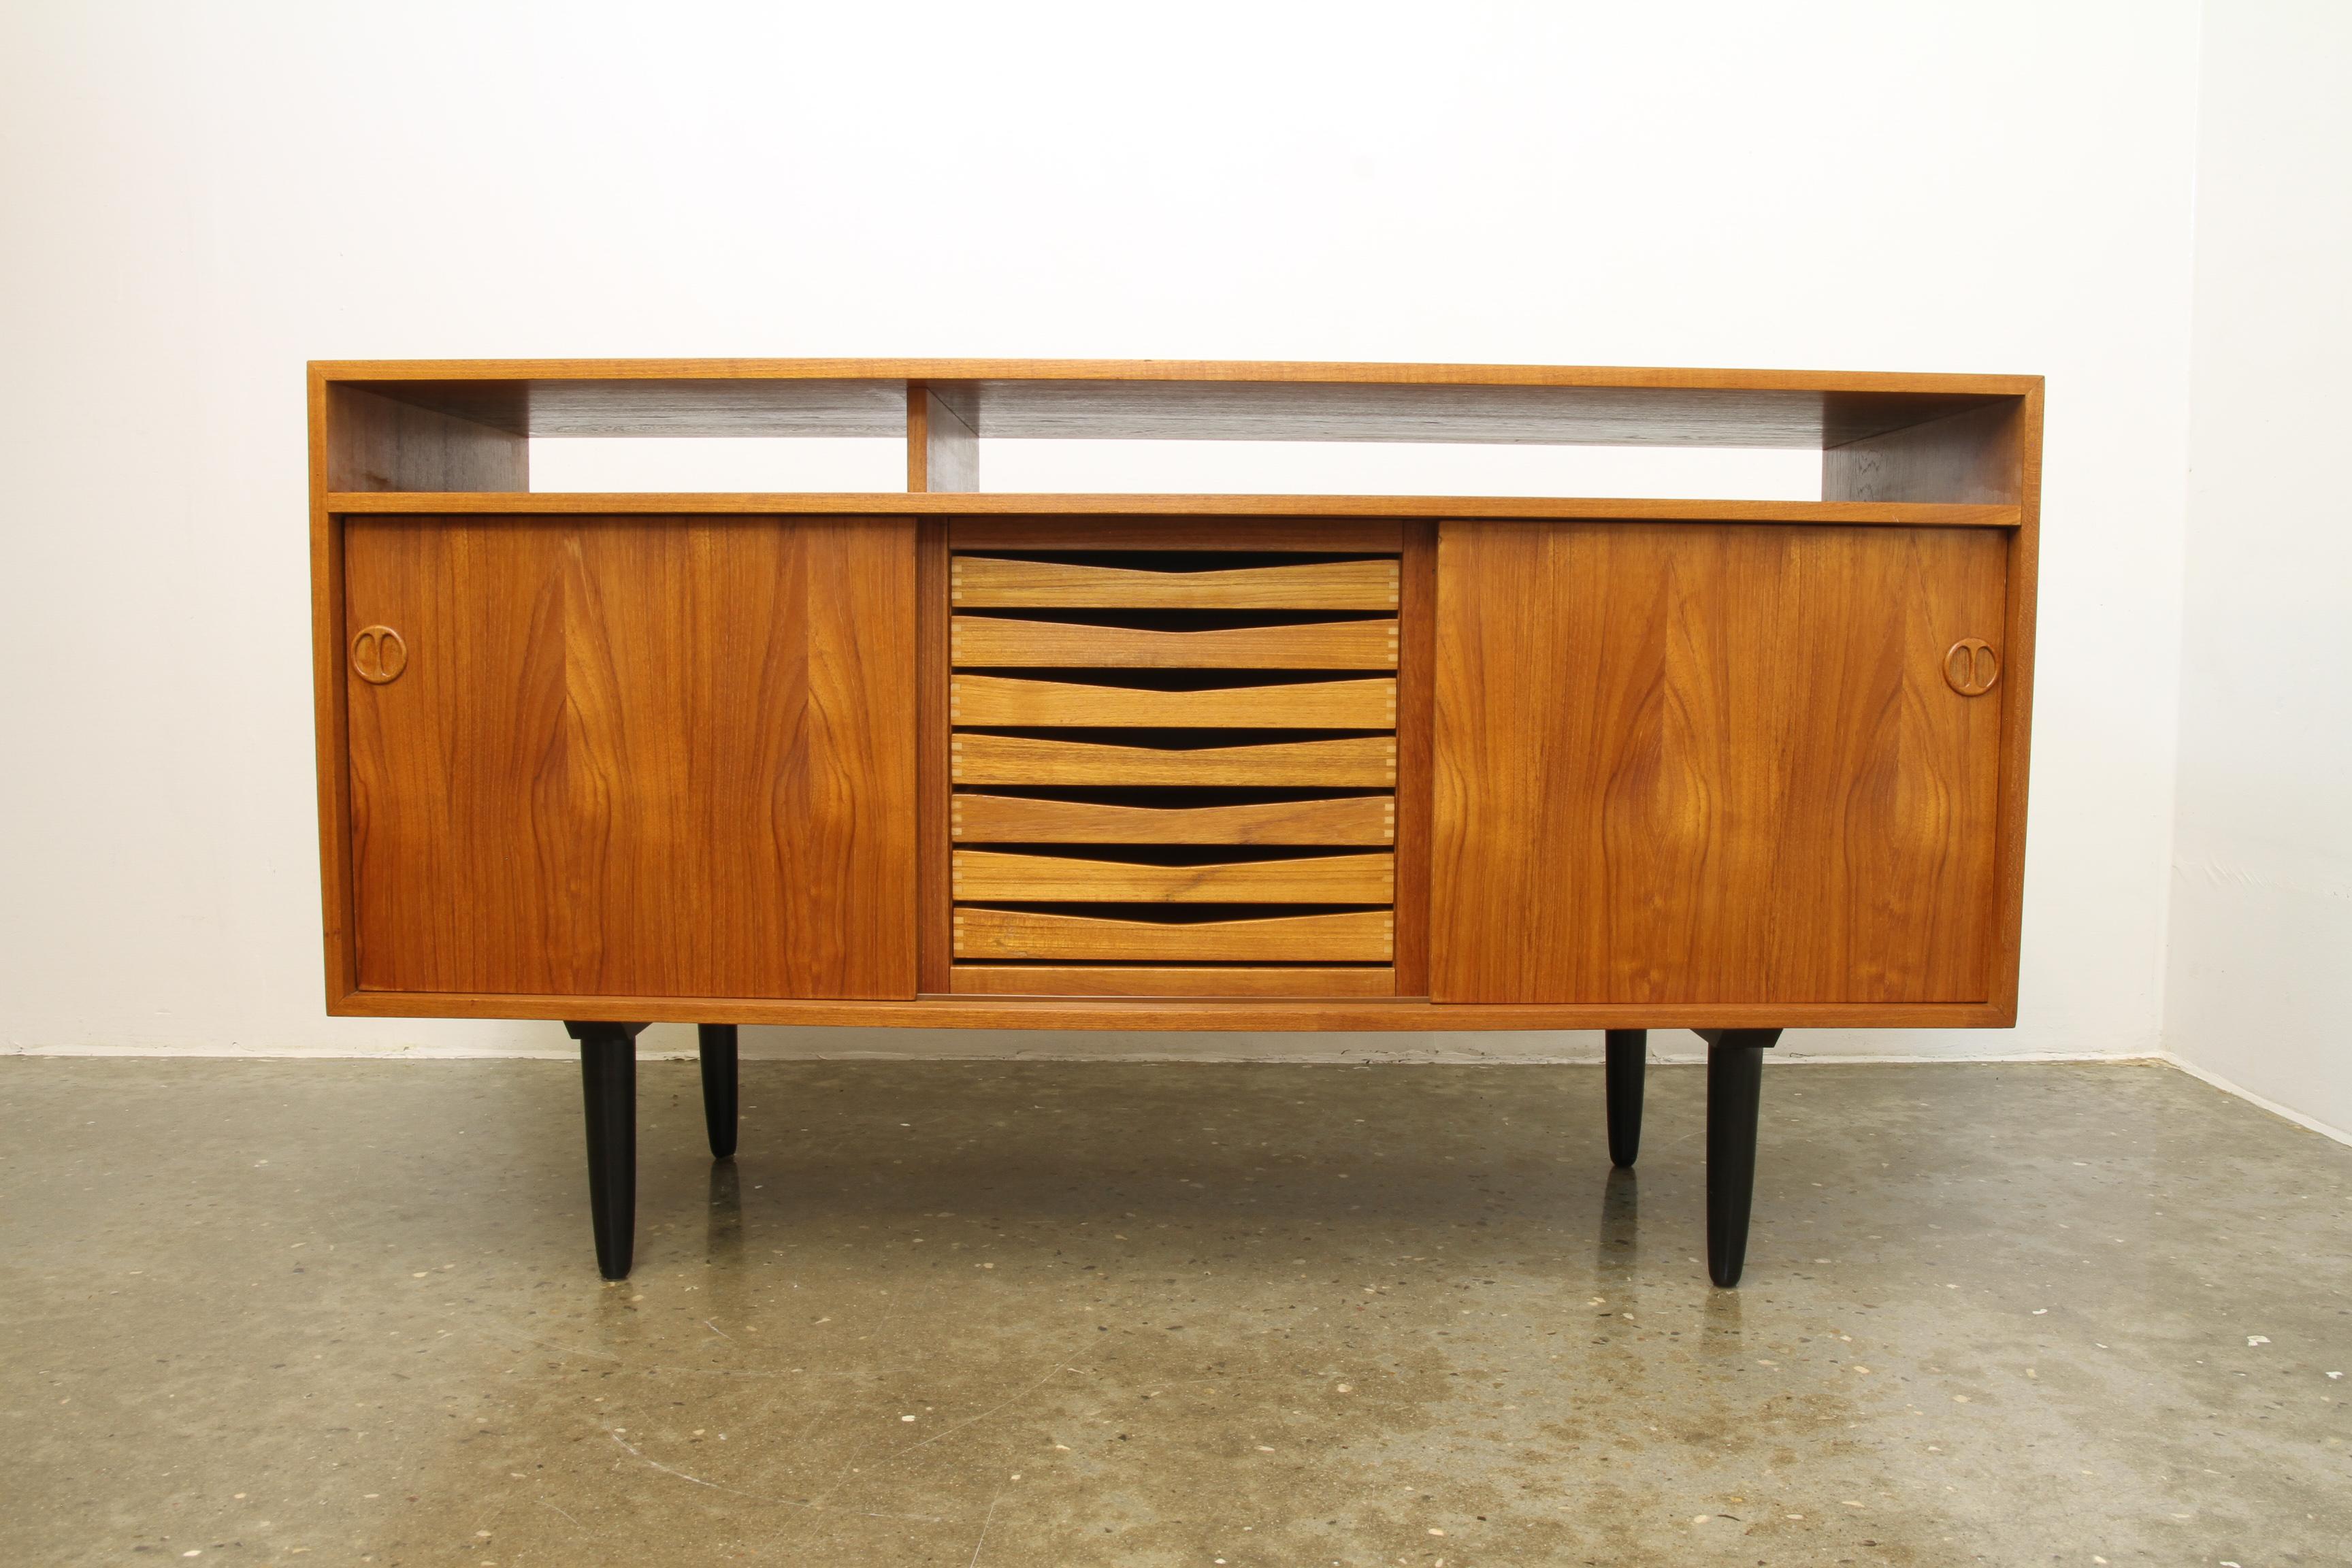 This low stylish Danish midcentury credenza in teak features two compartments with shelves, and a drawer unit in the middle. The drawers has beautiful visible joints. Loads of storage space. The open shelve is perfect for HiFi equipment.
Backside